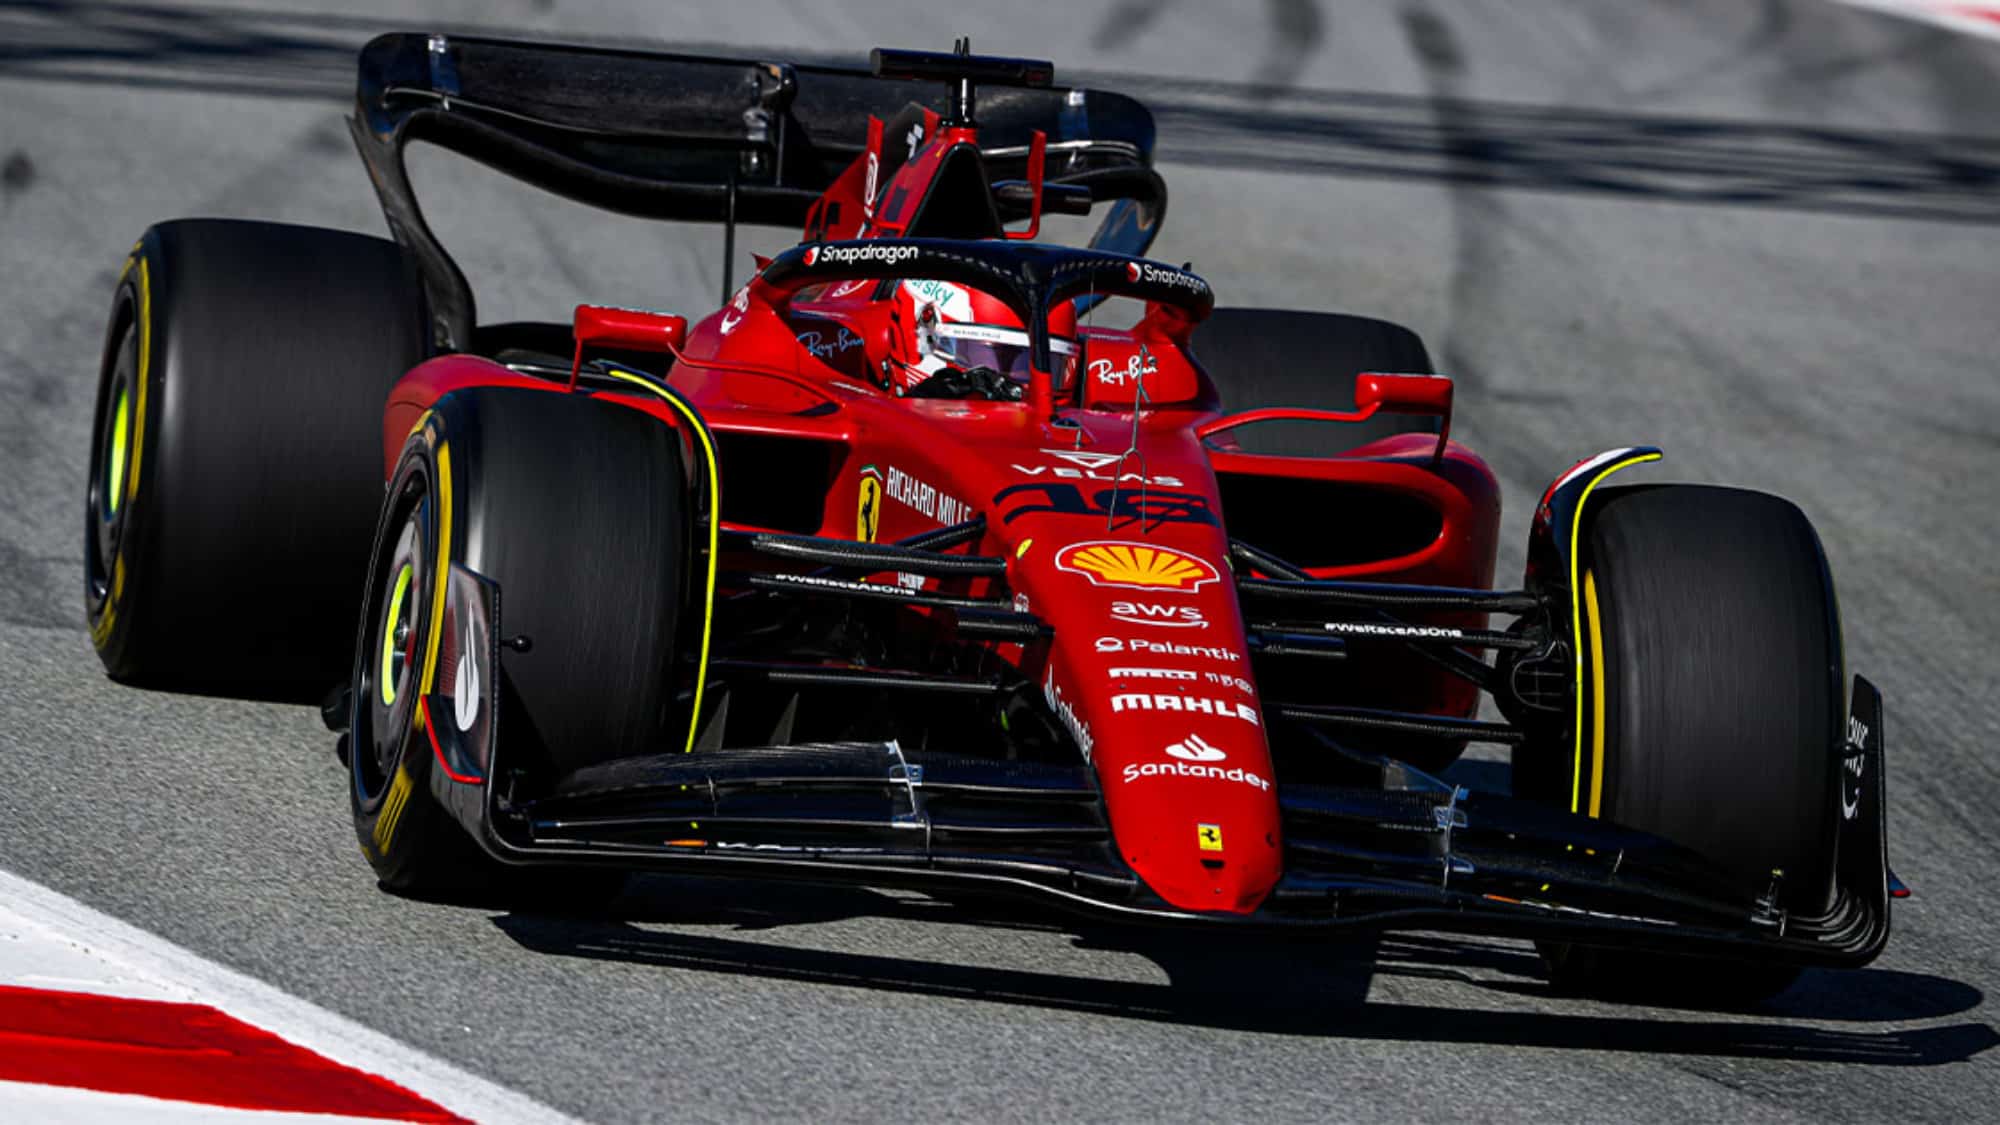 Ferrari tops F1 testing most laps completed and fastest time in first Barcelona session